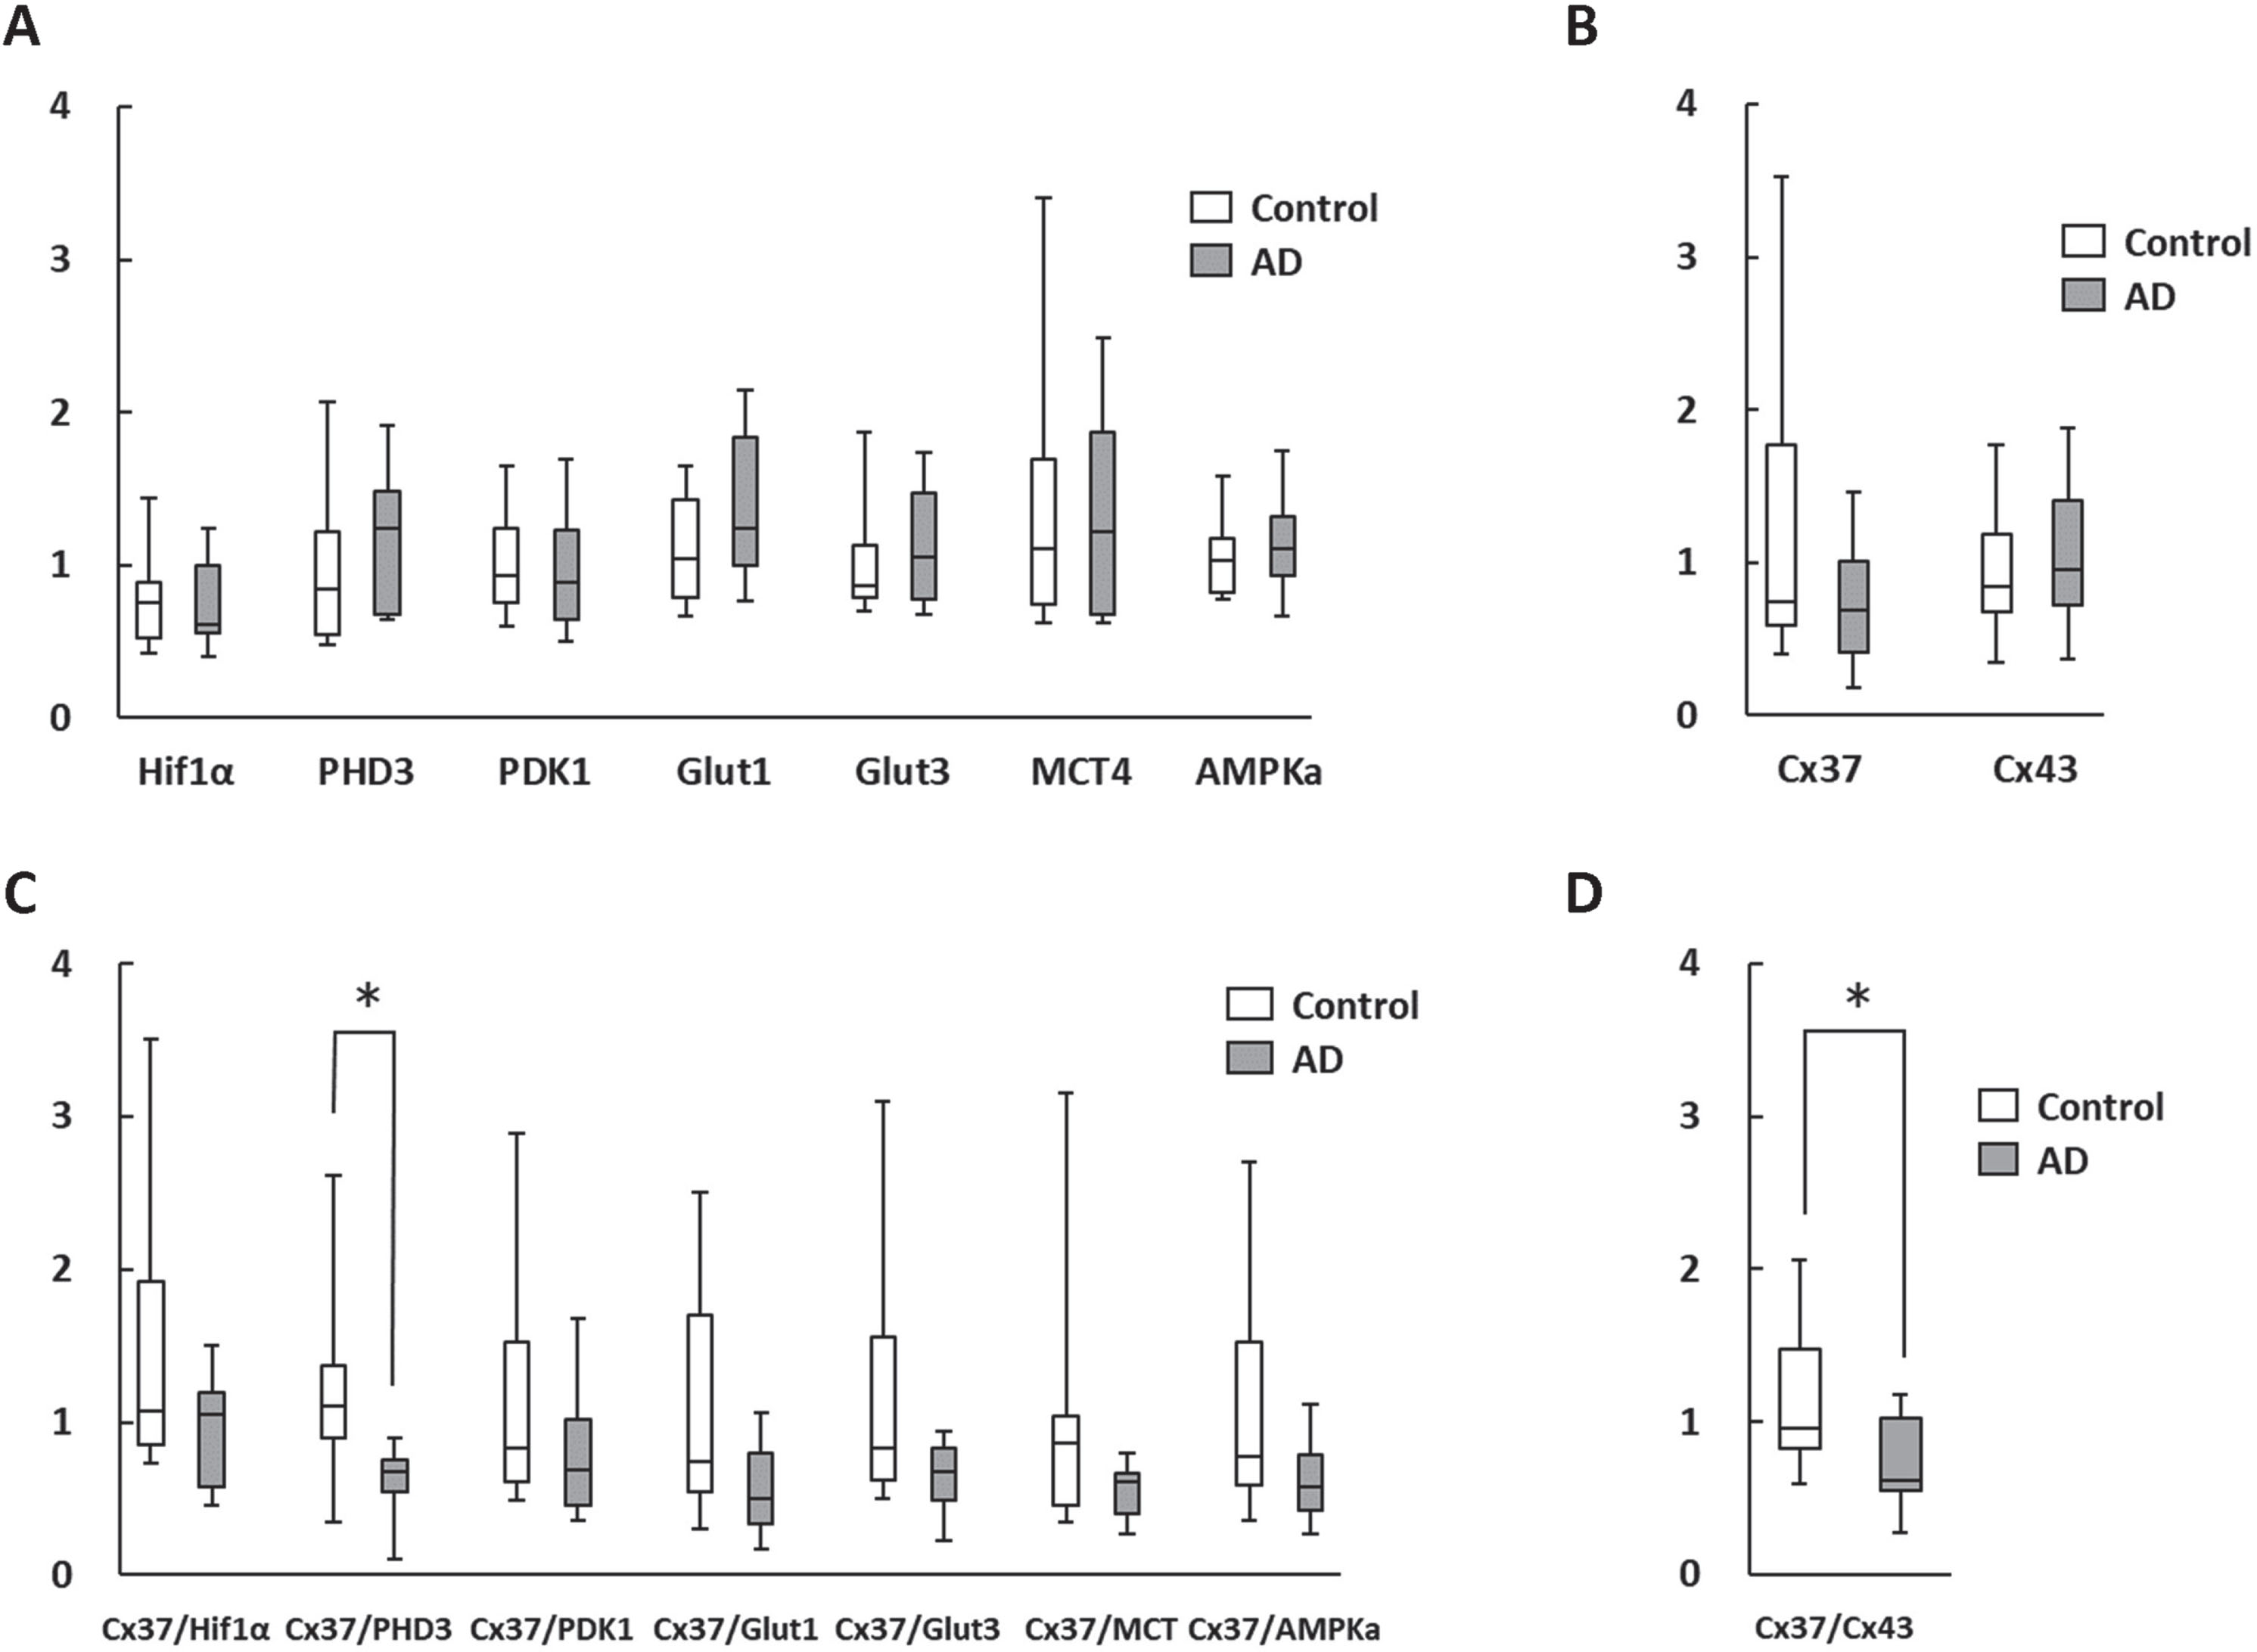 Change in RNA expression in circulating mononuclear cells. A, B) There were no statistically significant differences in metabolism-related (A) and gap junction (B) genes between AD patients and age-matched controls. C, D) Cx37/PHD3 (C) and Cx37/Cx43 ratios (D) were significantly lower in AD patients. *p < 0.05.